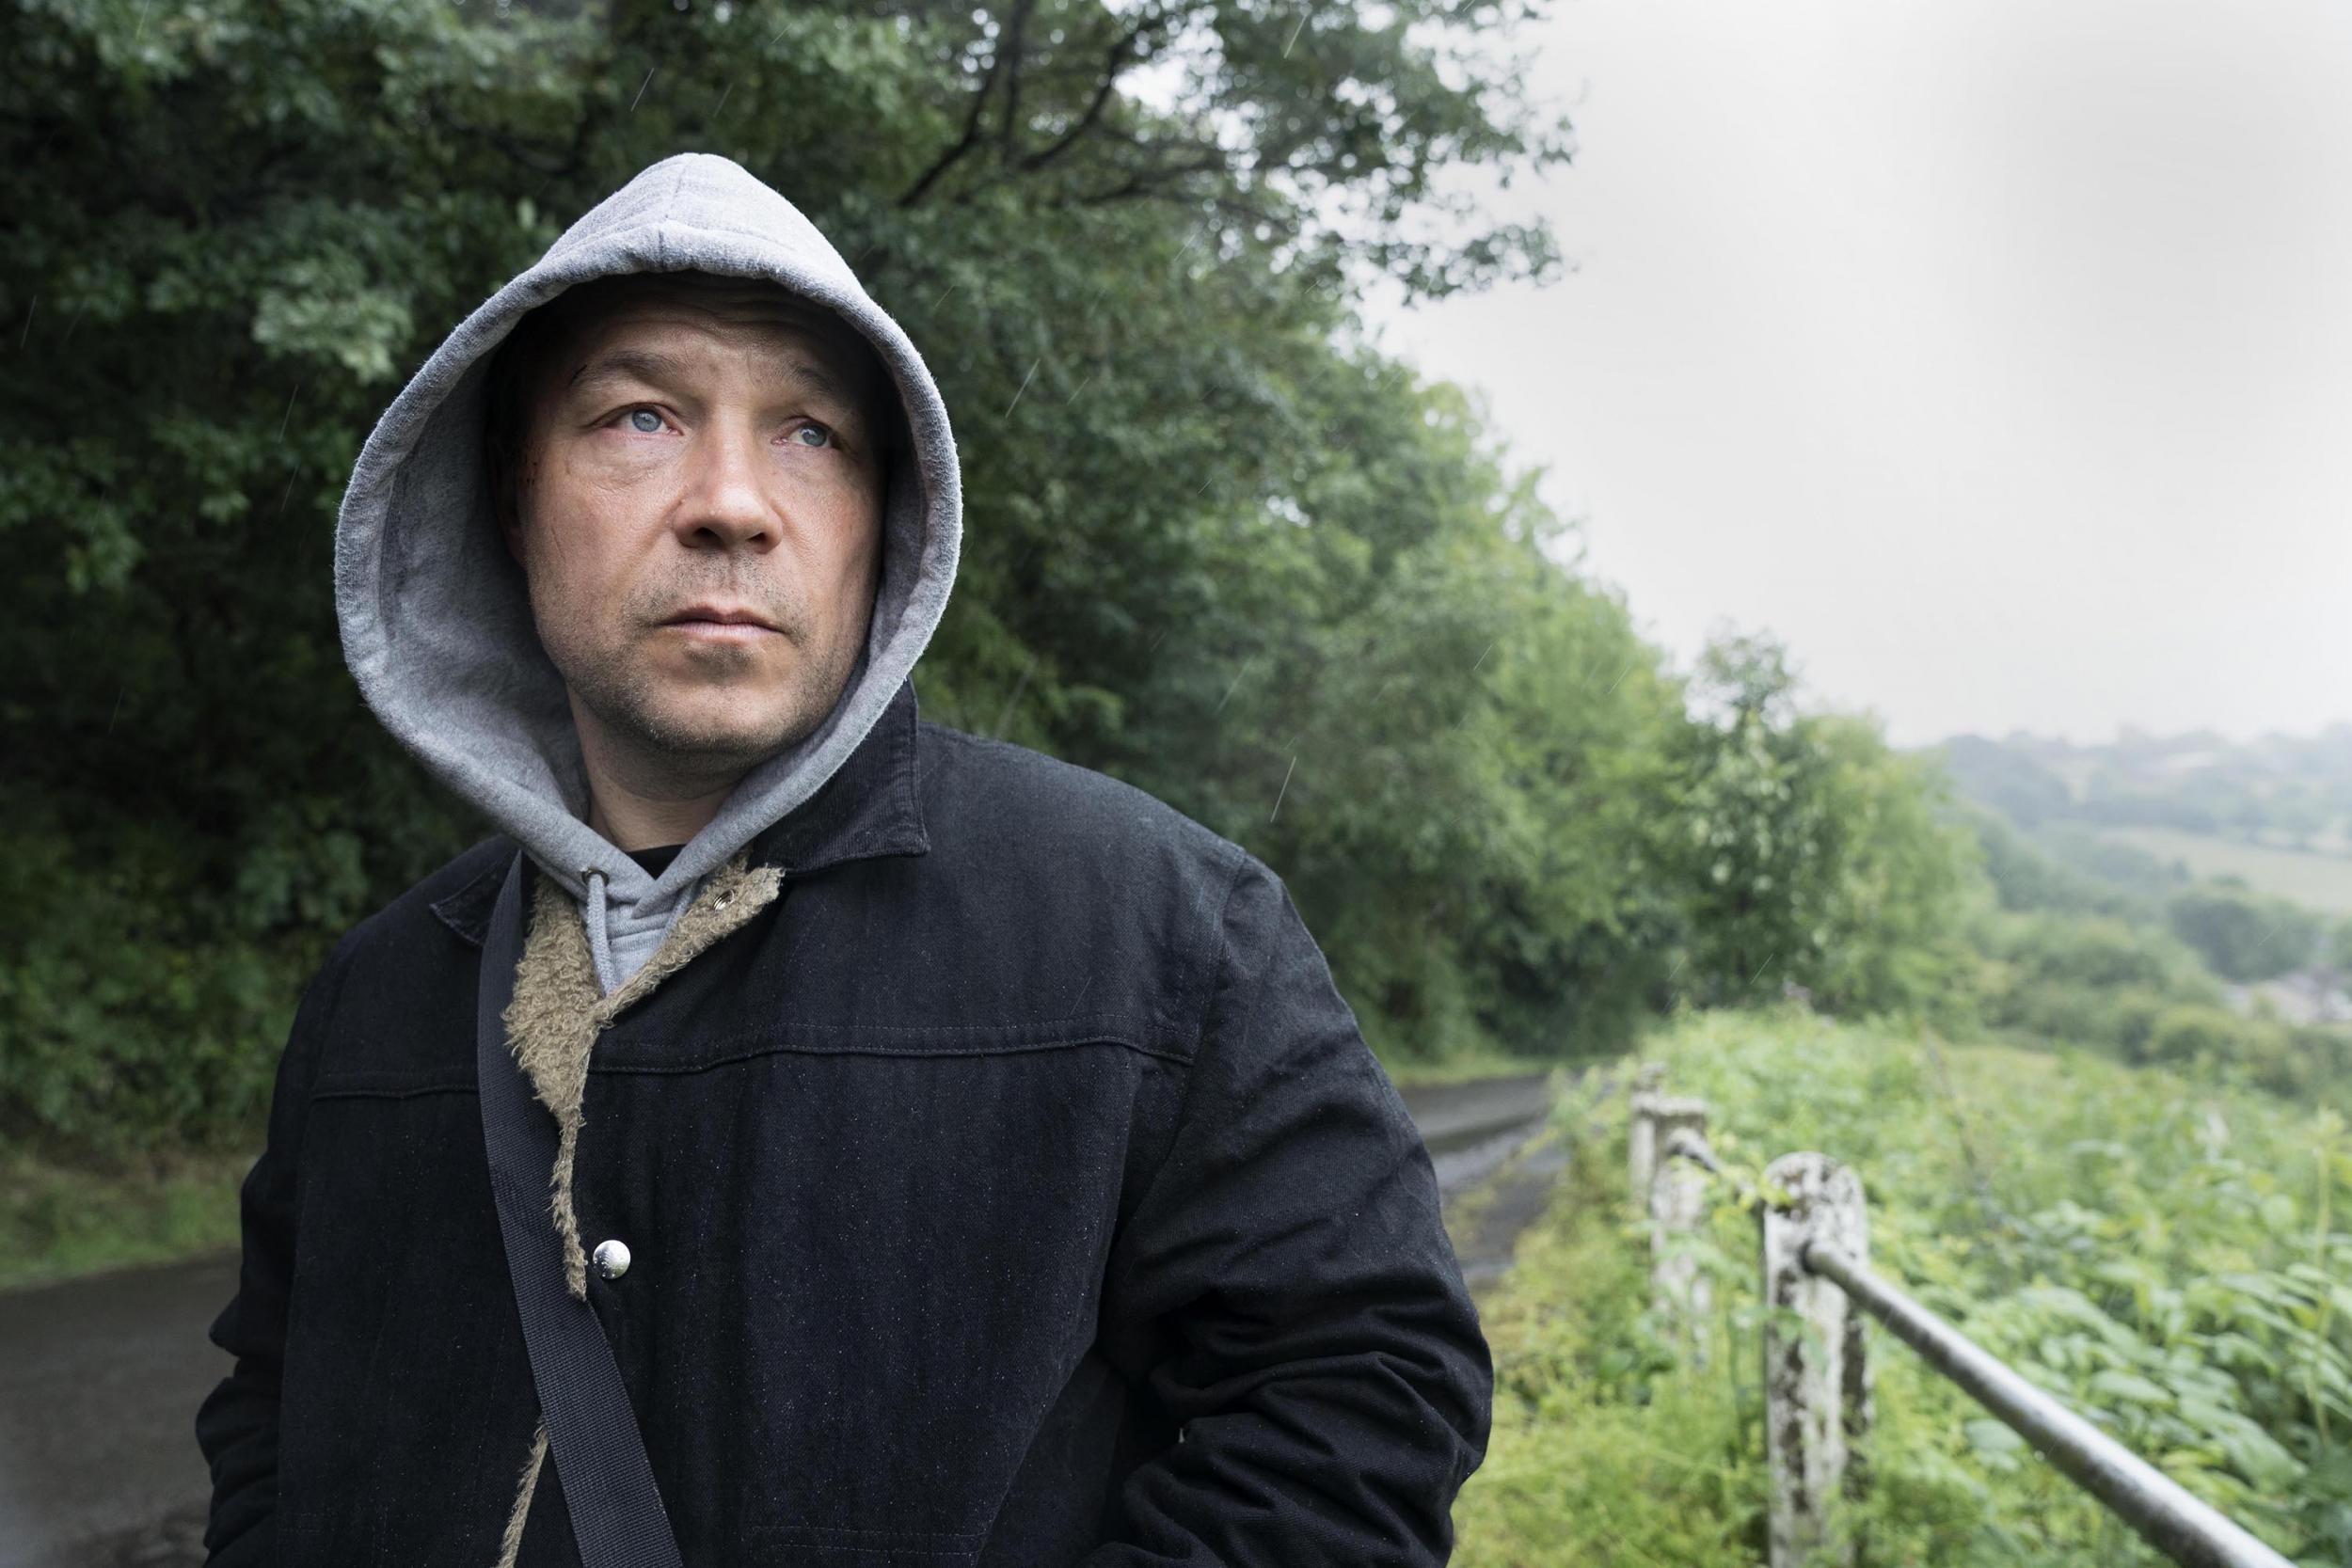 Stephen Graham plays Joseph with a subjugated pathos that is at once compelling and repellent